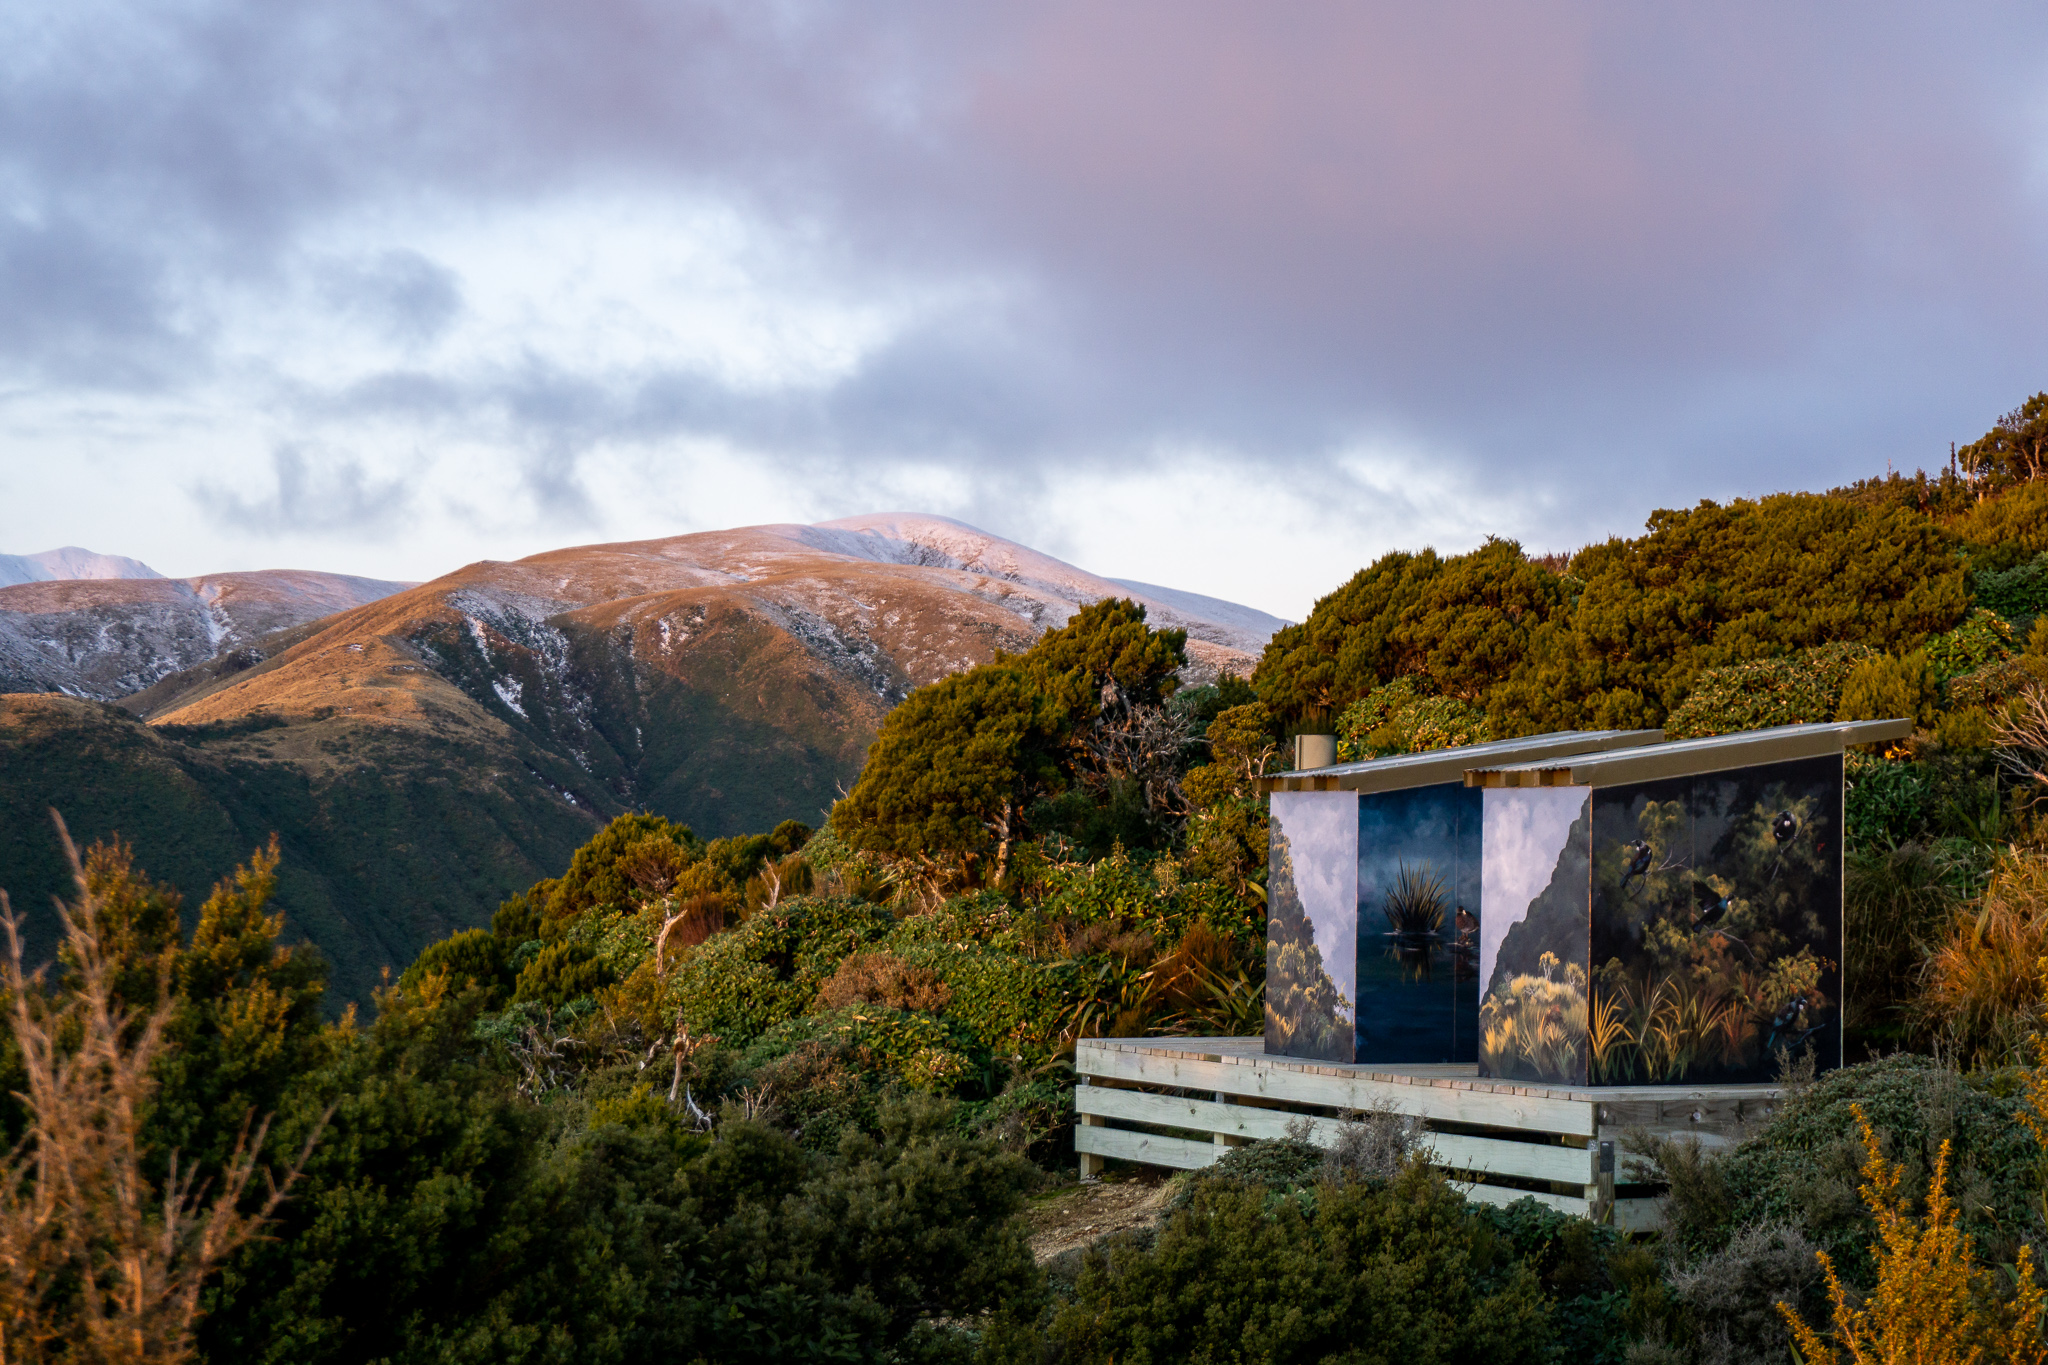 Shot of the beautifully painted Rangiwahia Hut long-drop toilets at sunset with snow on the hills behind